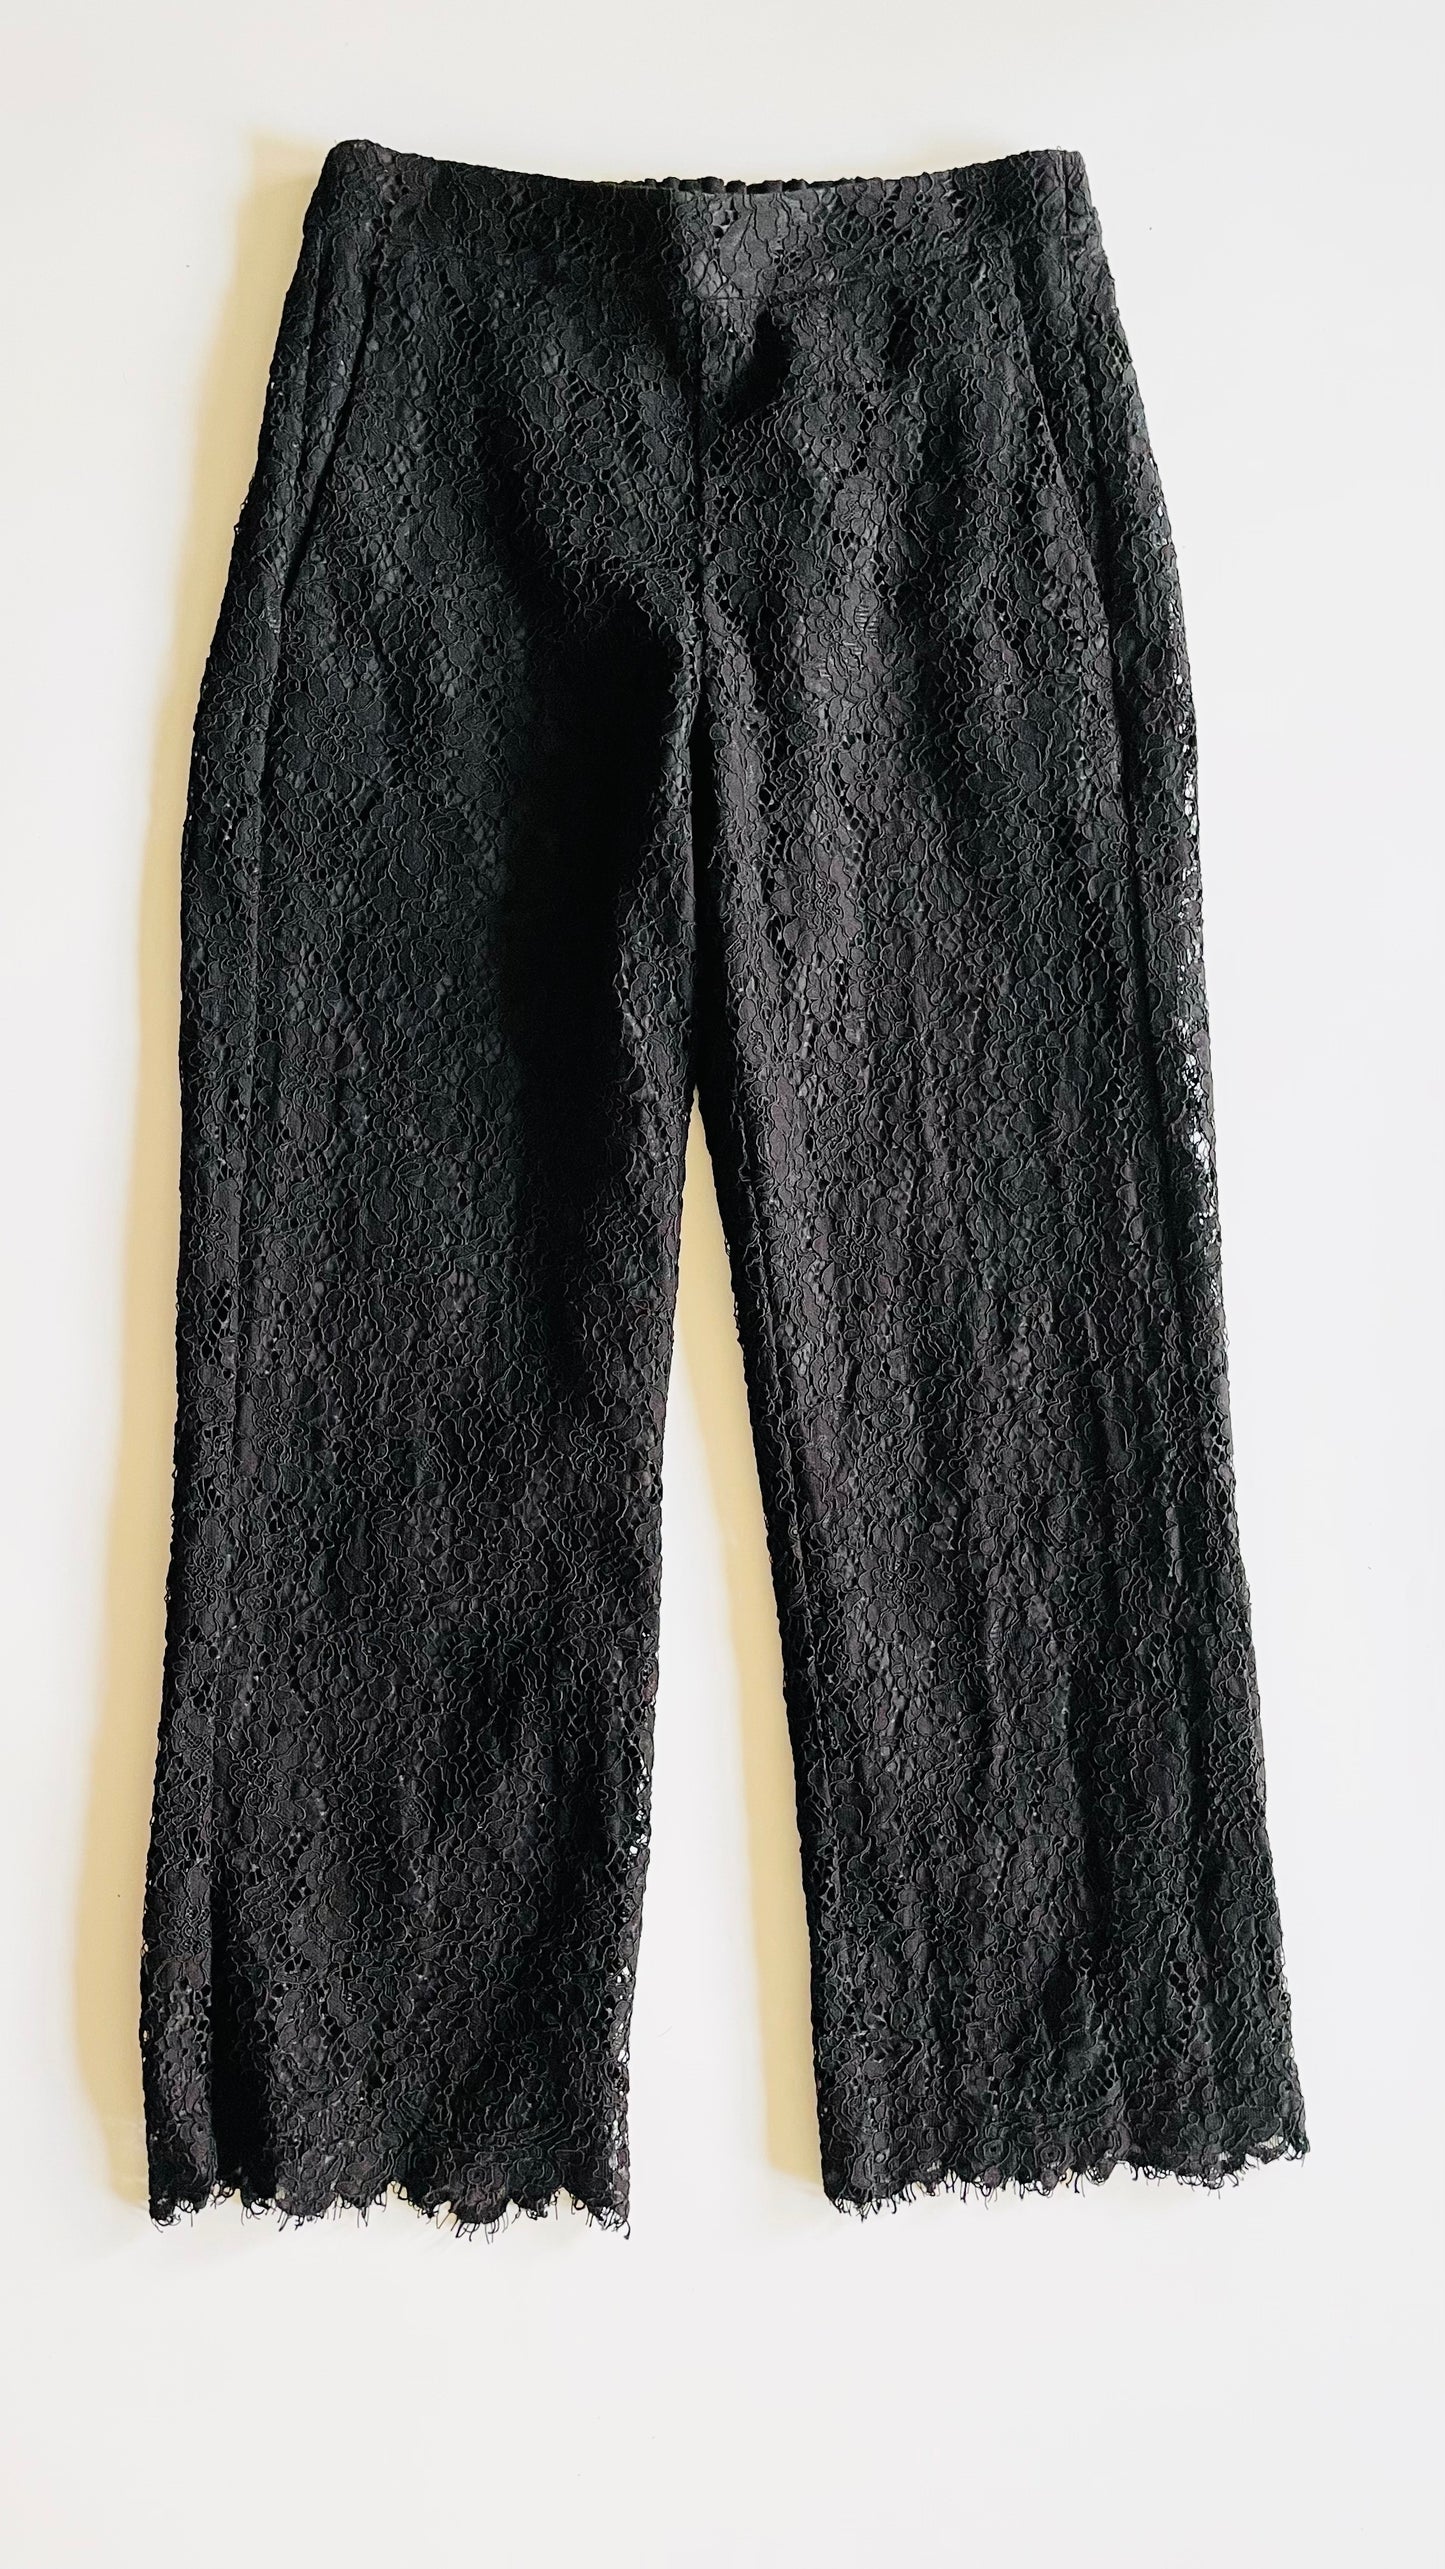 Pre-Loved black lace high rise trousers - Size 4